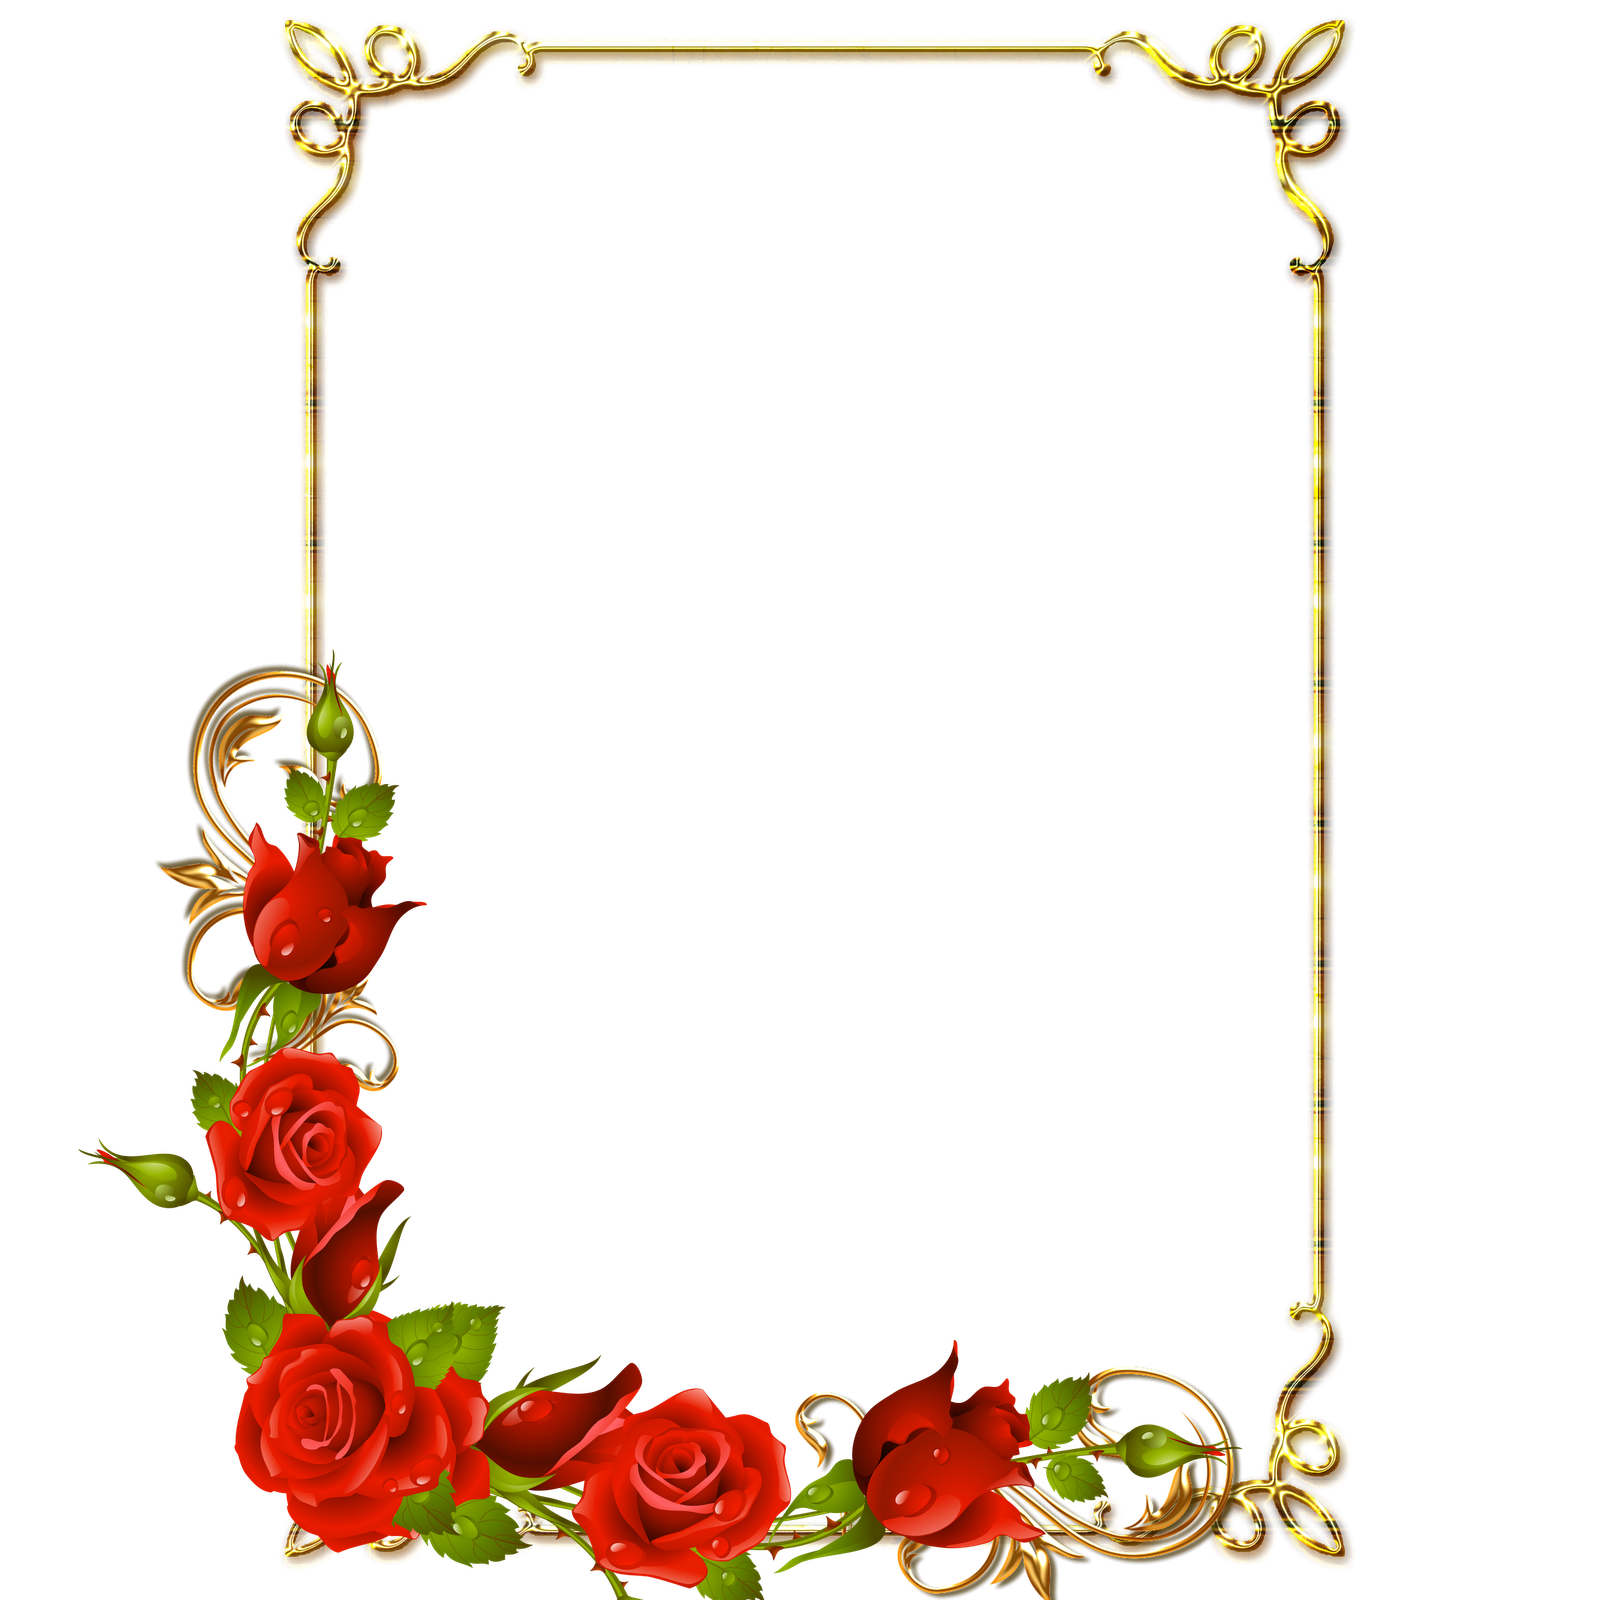 Rose Photo Frame Png Transparent Background Free Download 24574 Freeiconspng